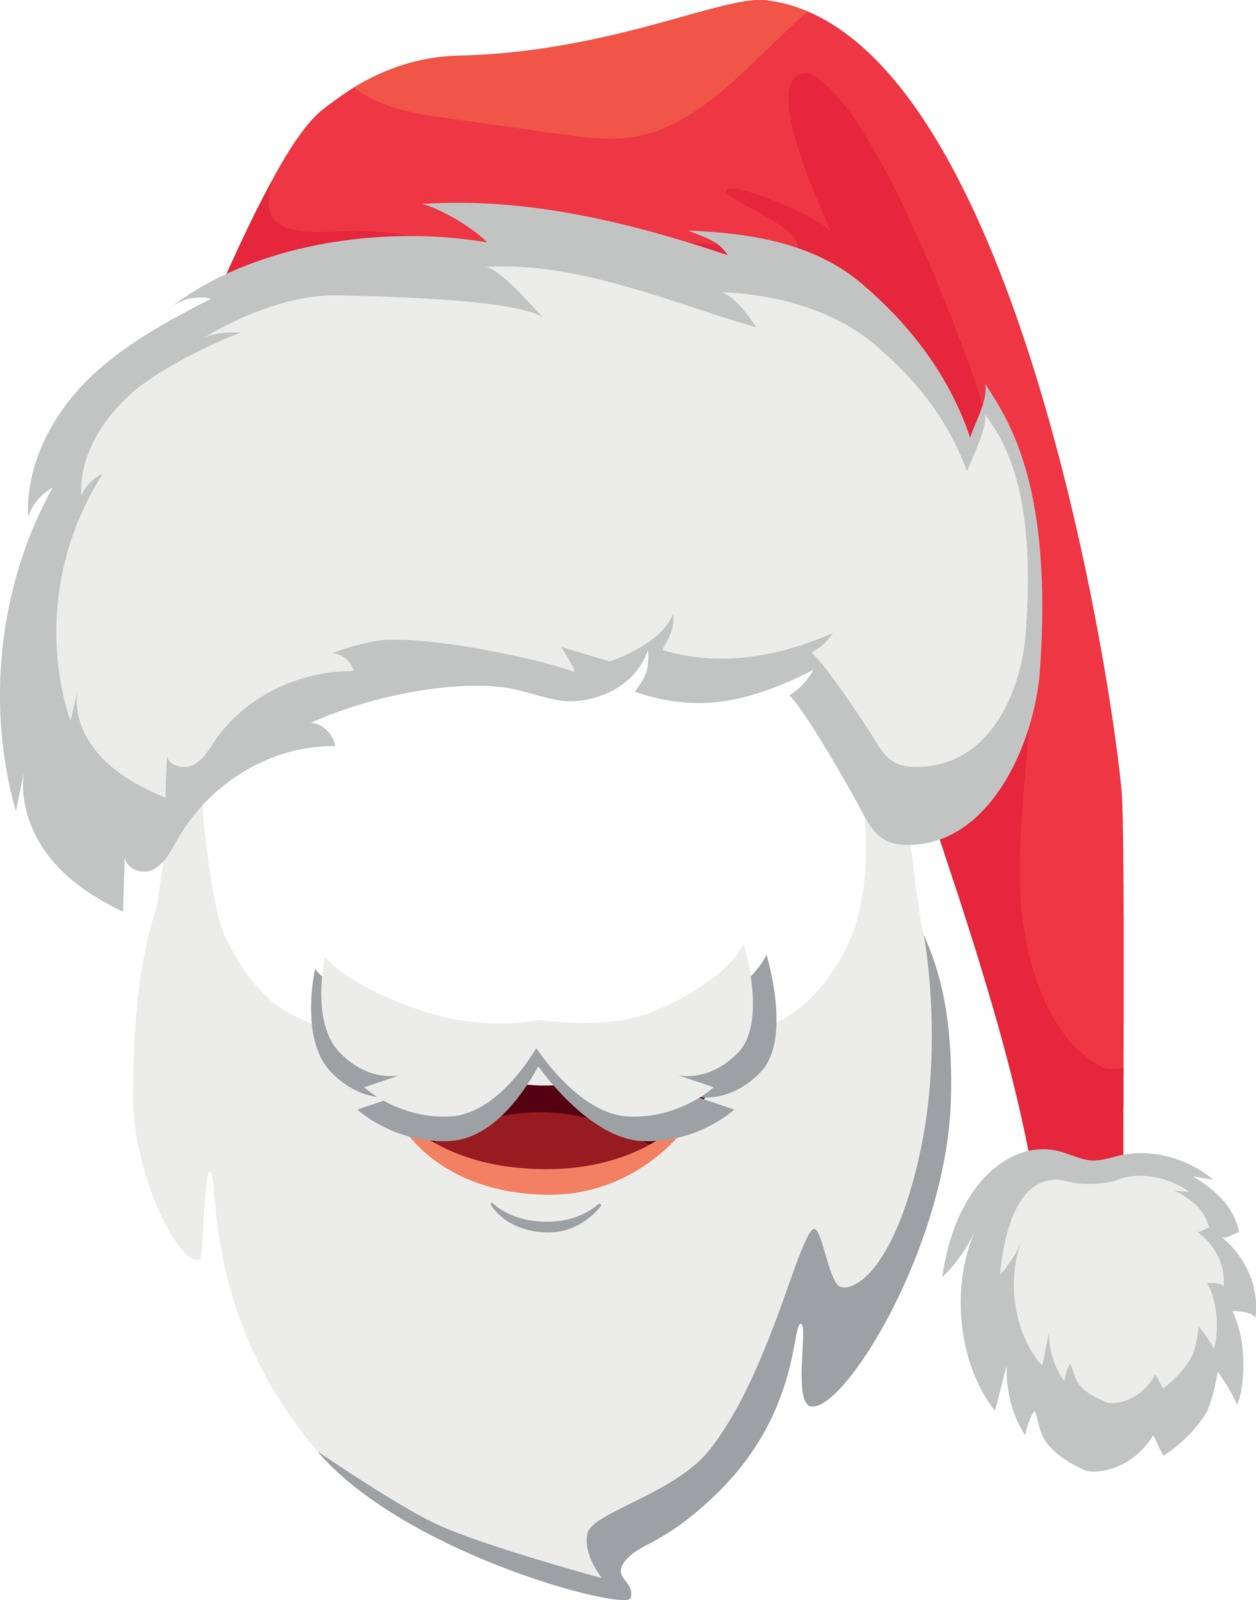 Santa Claus hat and beard by Visual-Content